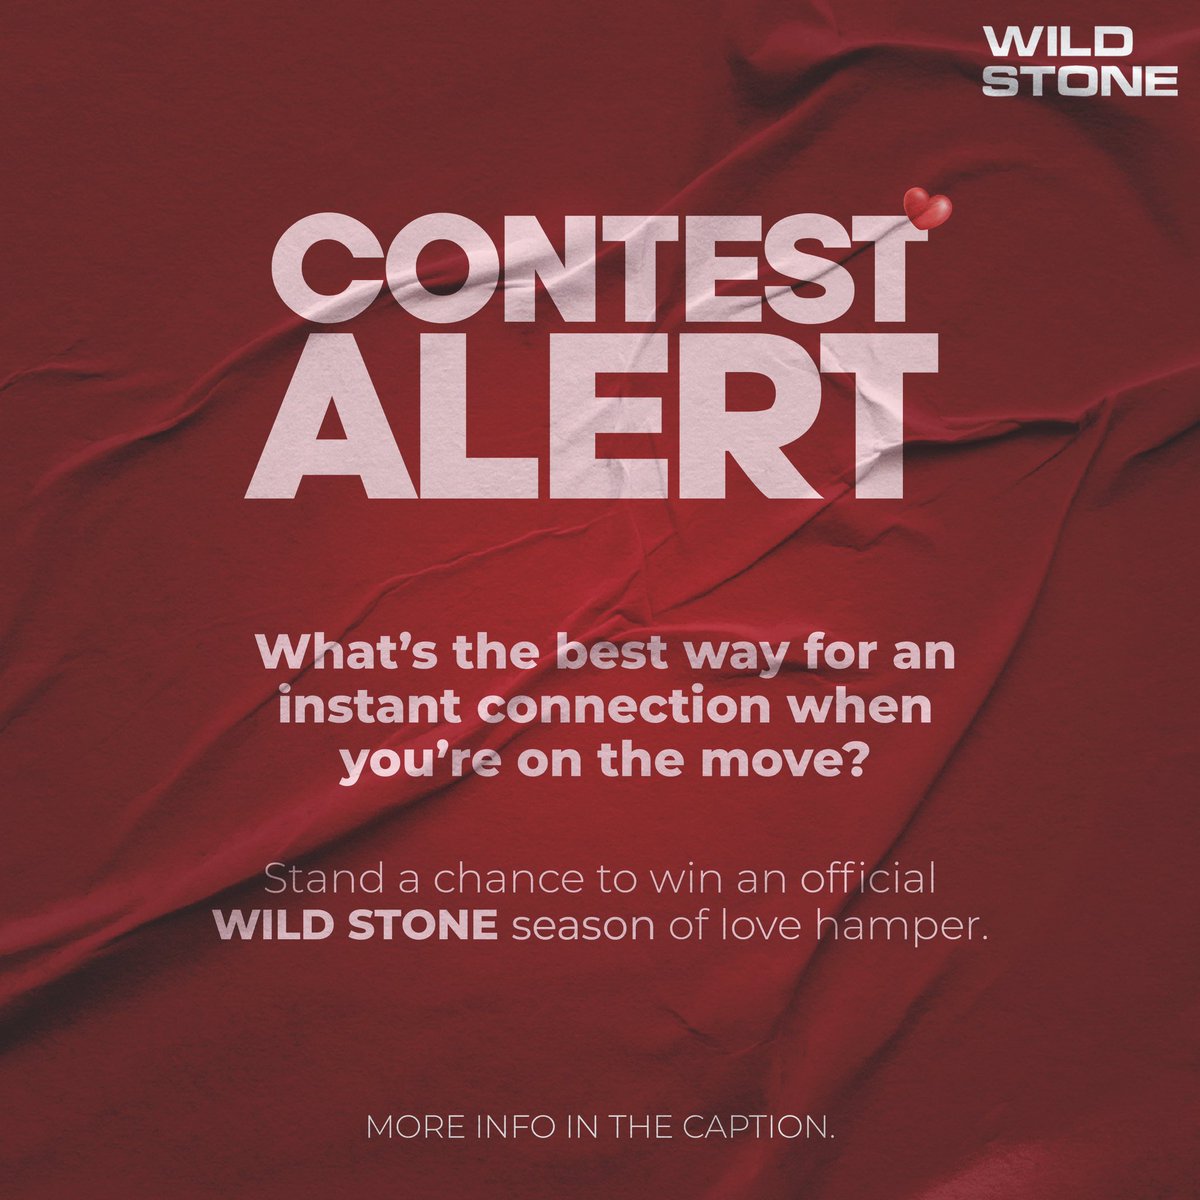 Share your answer in the comments below and tag two friends. We’ll announce the winners soon. #WildStone #LogTohNoticeKarenge #Perfume #ChocolateDay #ValentinesWeek #Valentines #ValentinesDay #ValentinesDay2024 #ValentineGift #ContestAlert #ValentinesContest #Giveaway